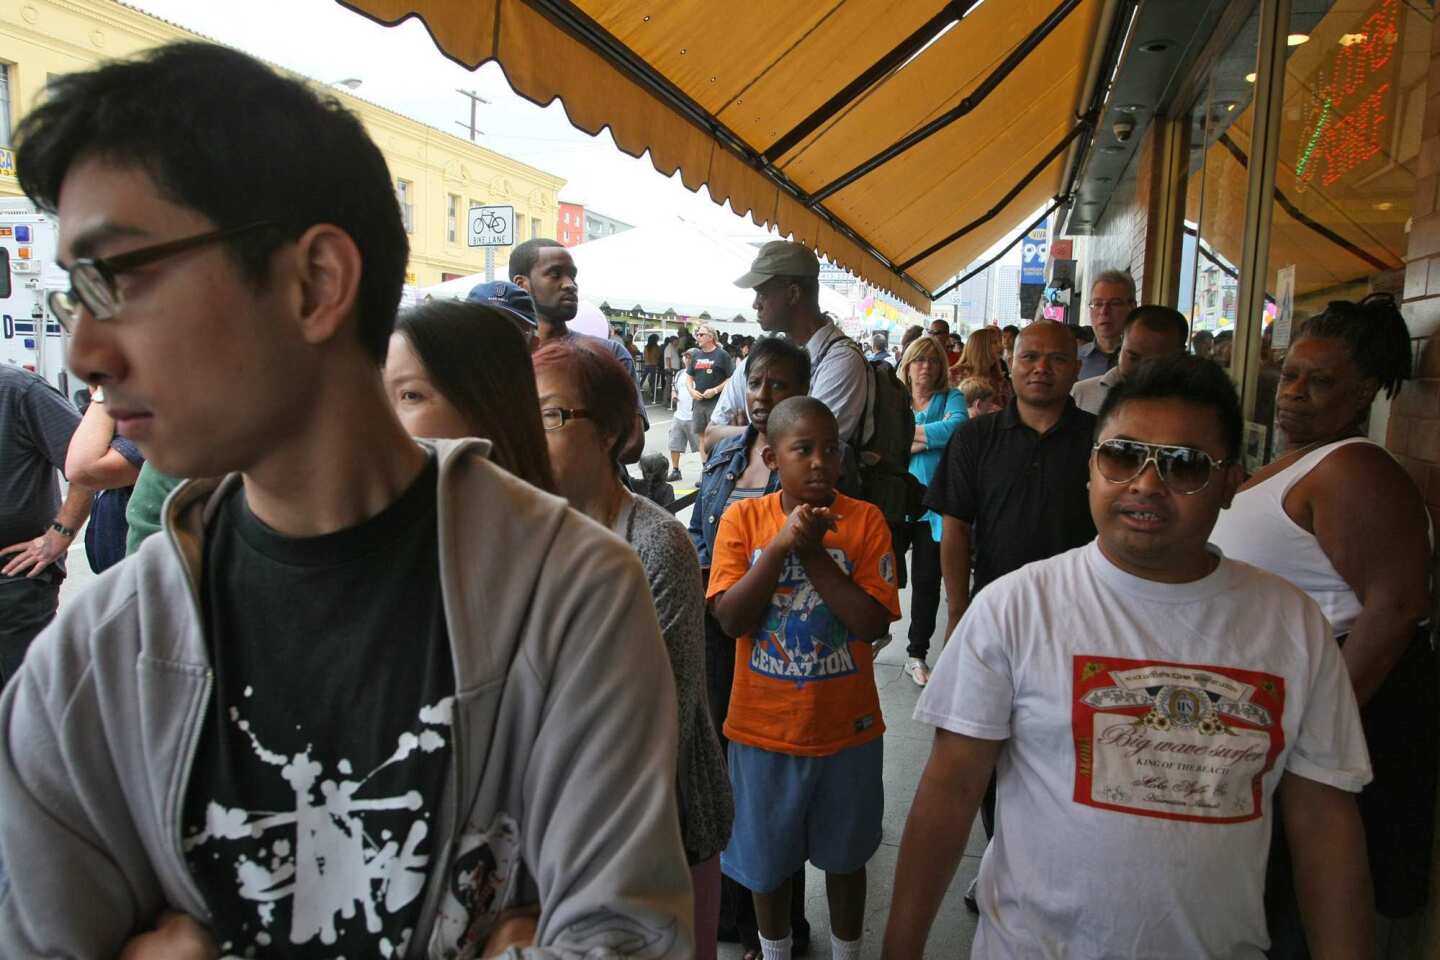 Customers wait outside Langer's Deli in Los Angeles. The landmark restaurant at 7th and Alvarado streets near MacArthur Park is giving away free No. 19s -- its most popular sandwich -- through Saturday.